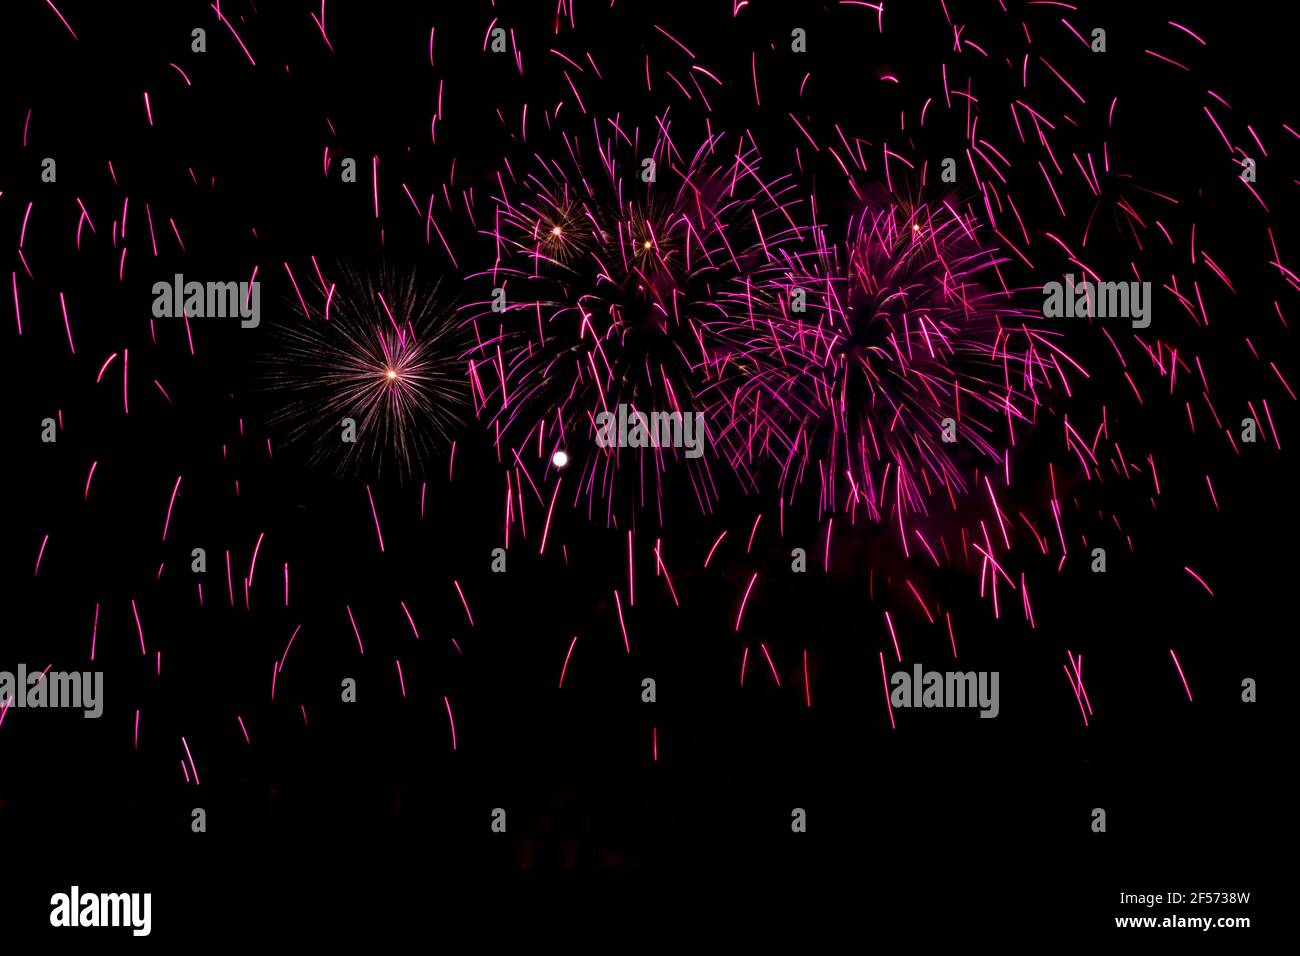 Full moon surrounded by pink and purple fireworks Stock Photo